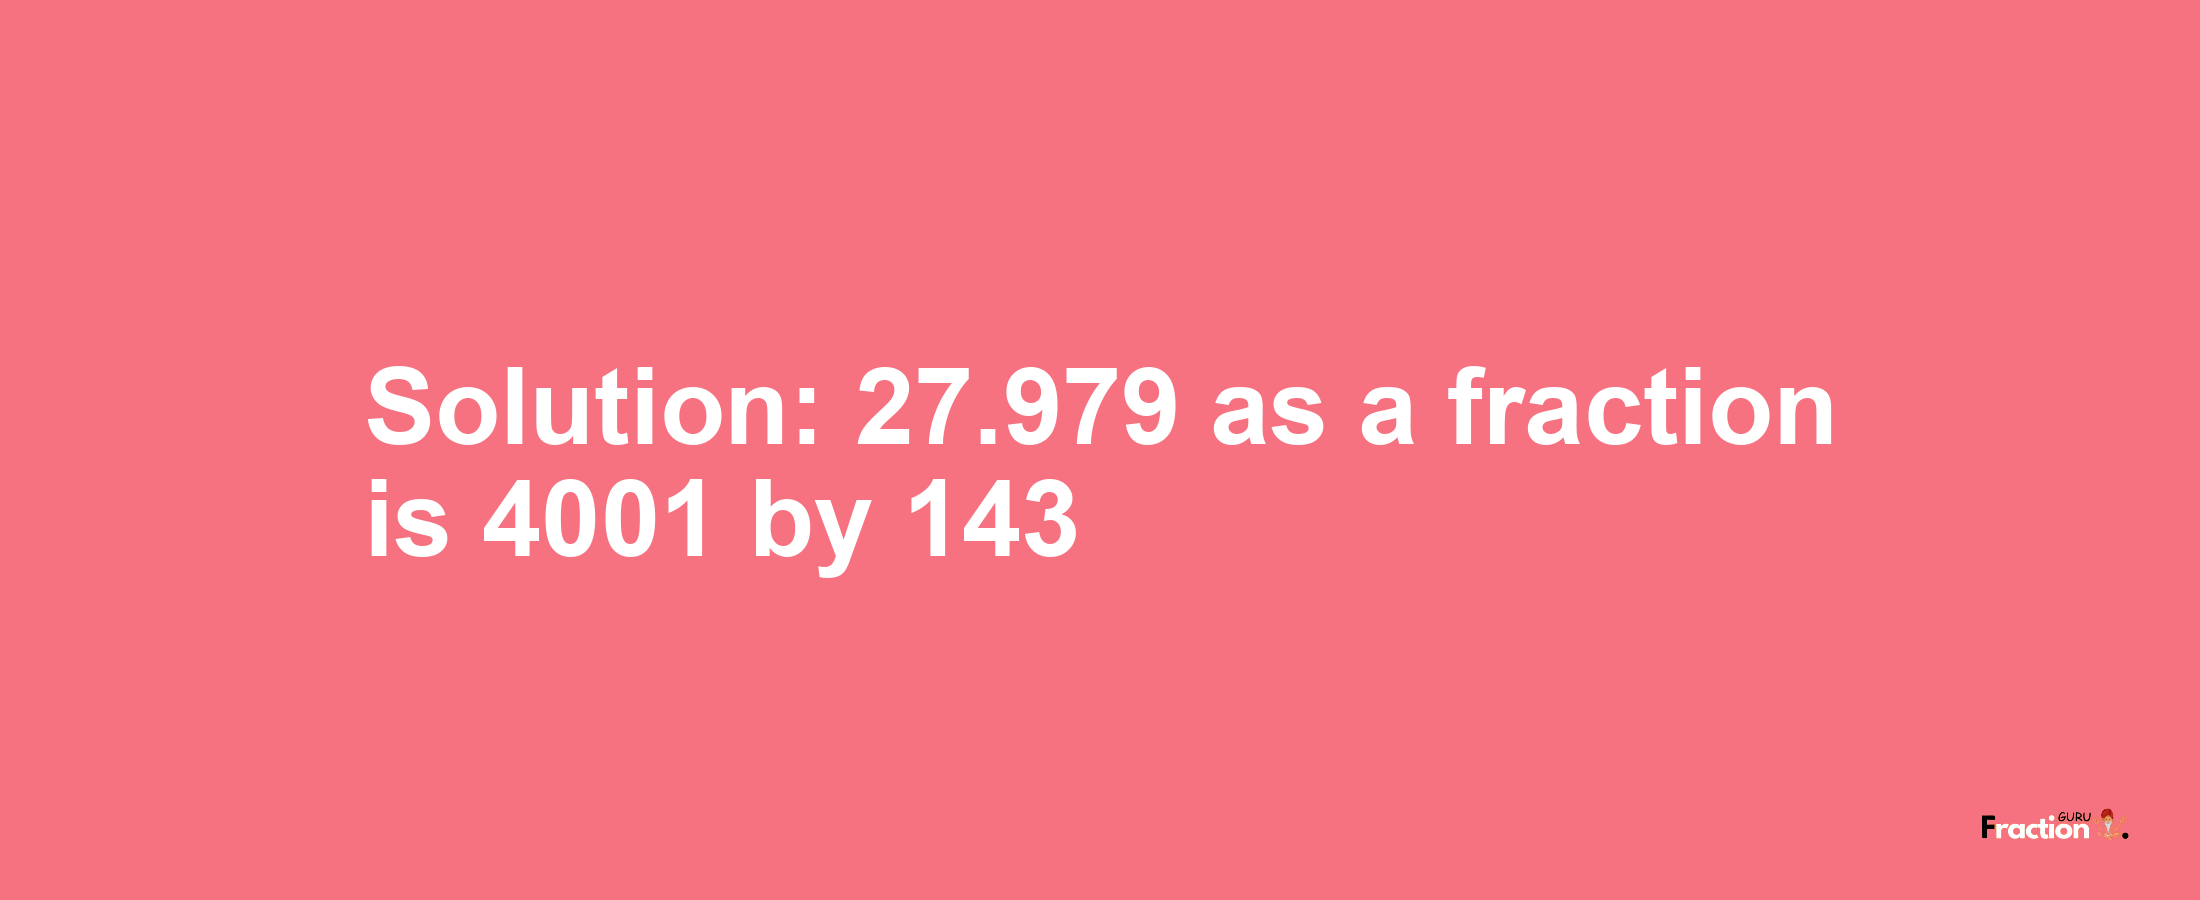 Solution:27.979 as a fraction is 4001/143